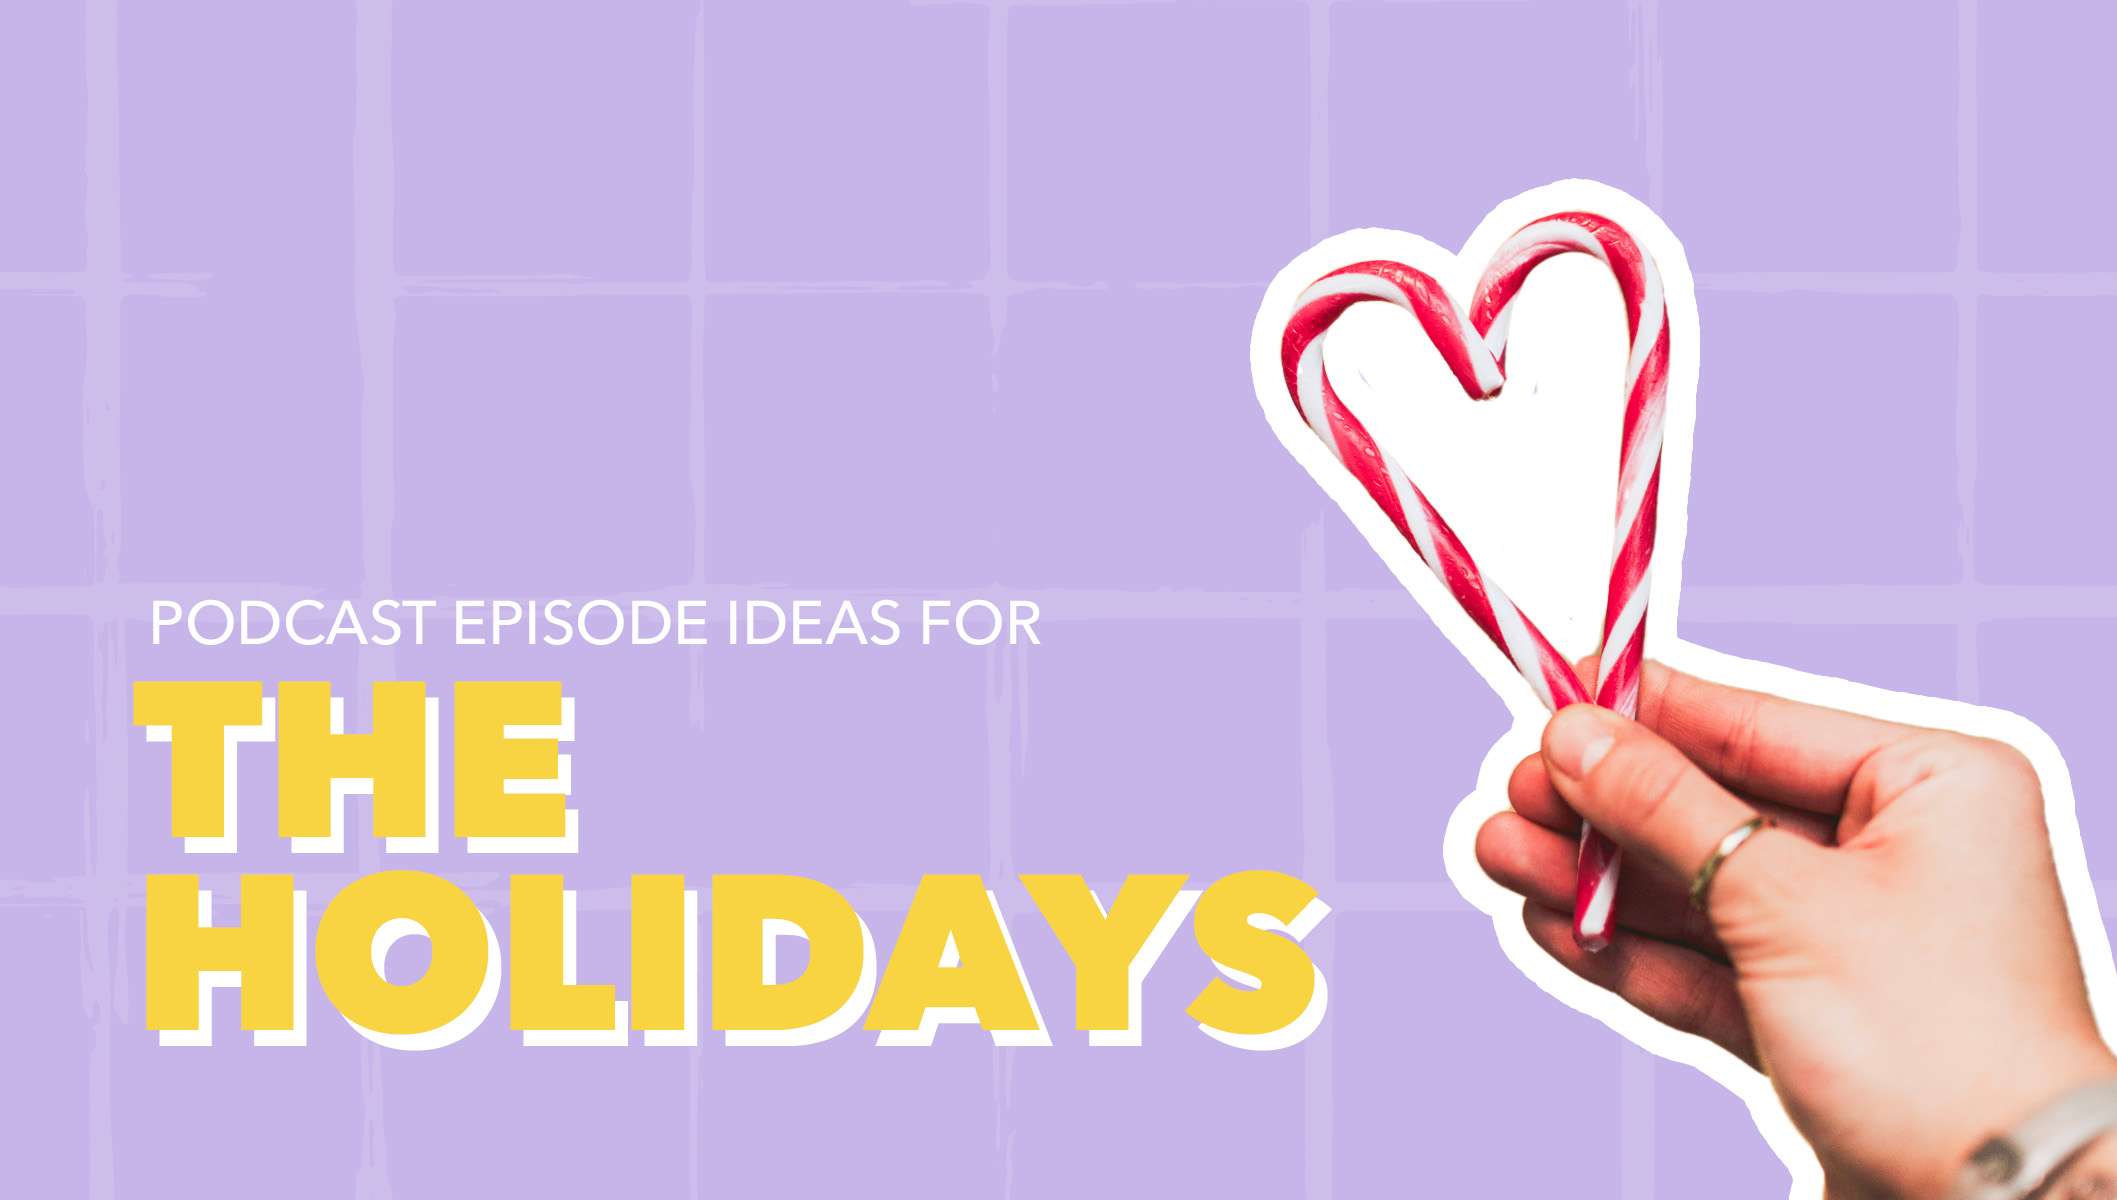 Podcast Episode Ideas for The Holidays